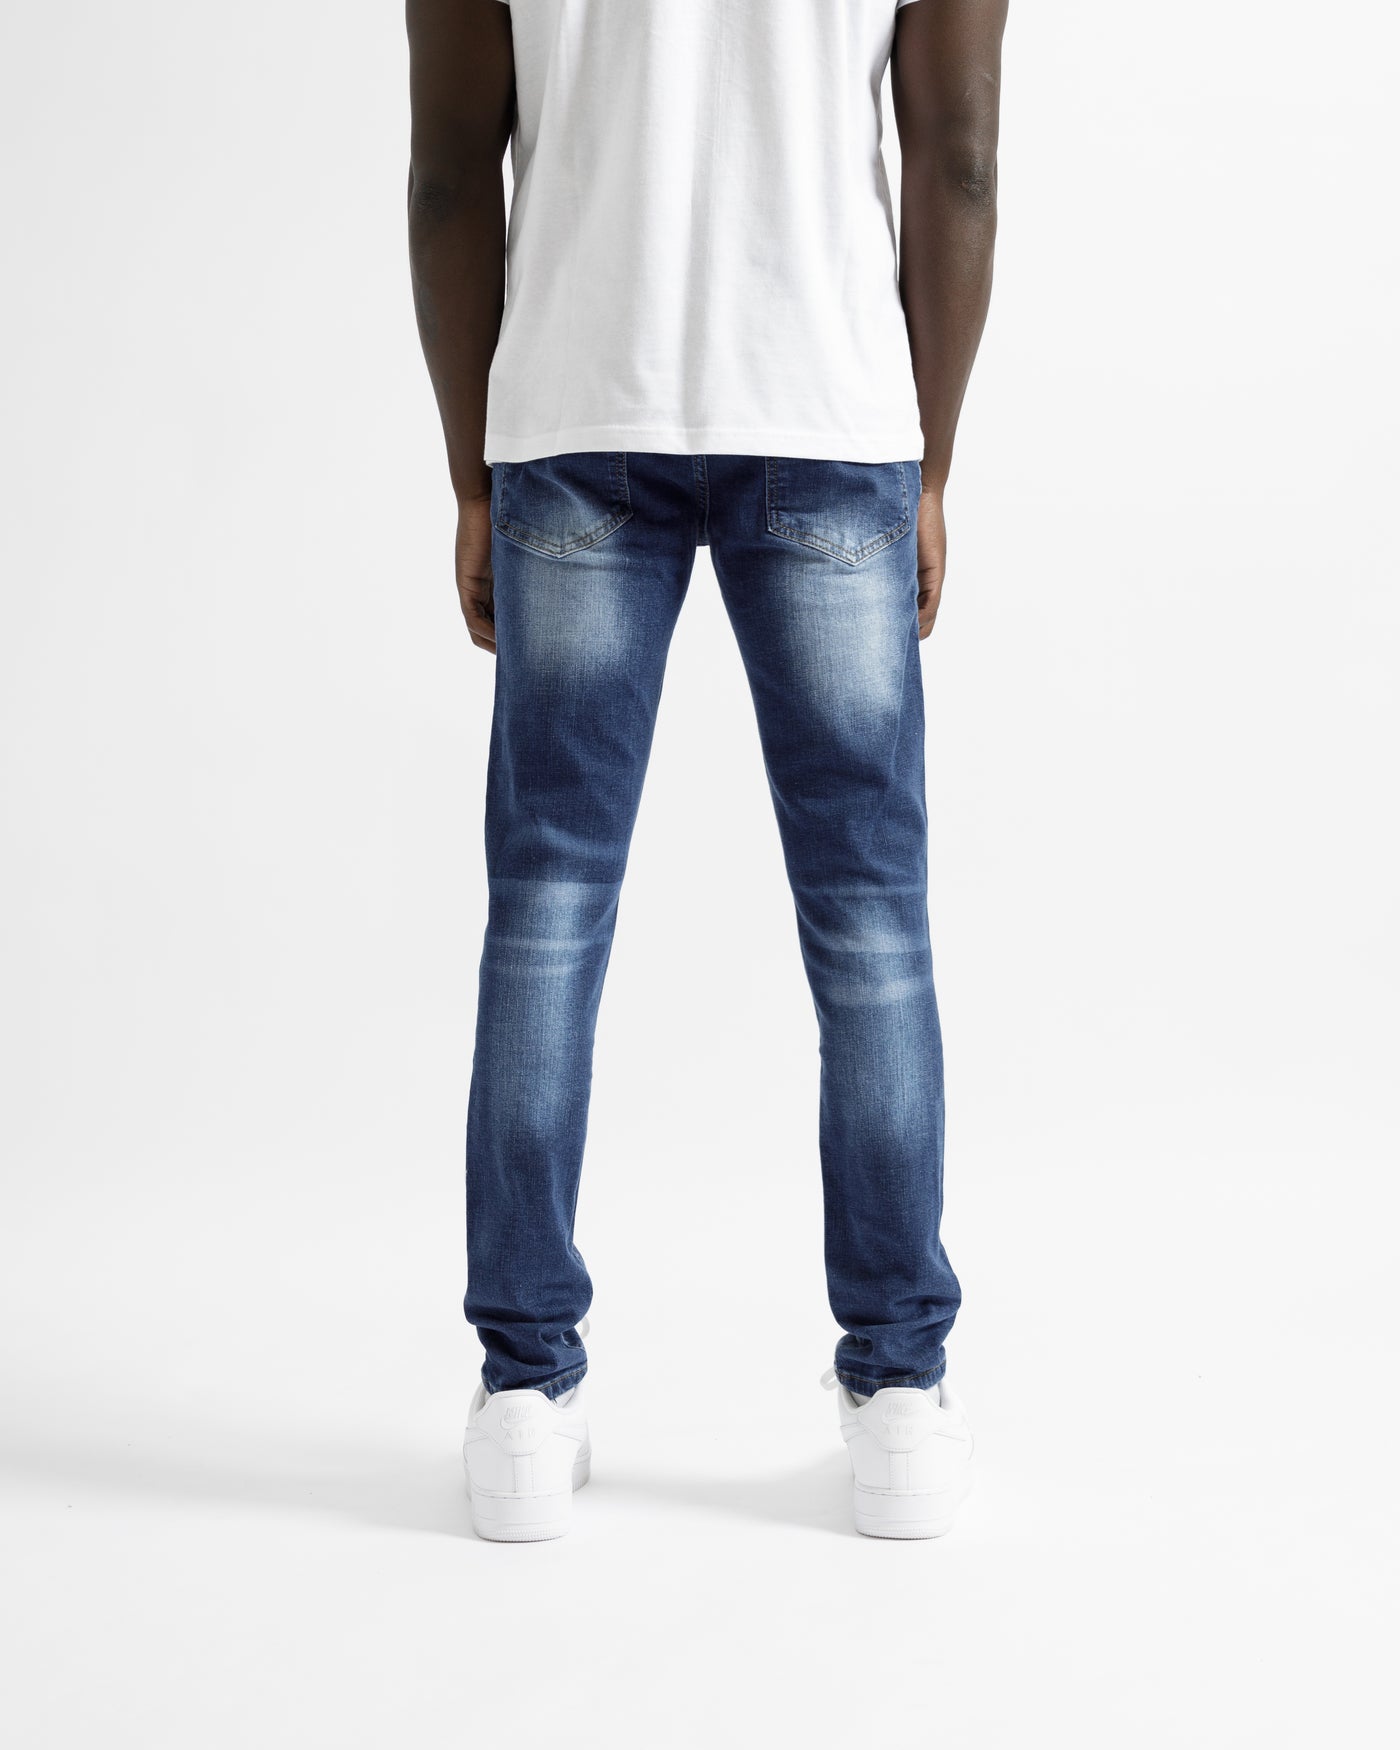 Magiri Montpellier Distressed Ripped Jeans in Blue